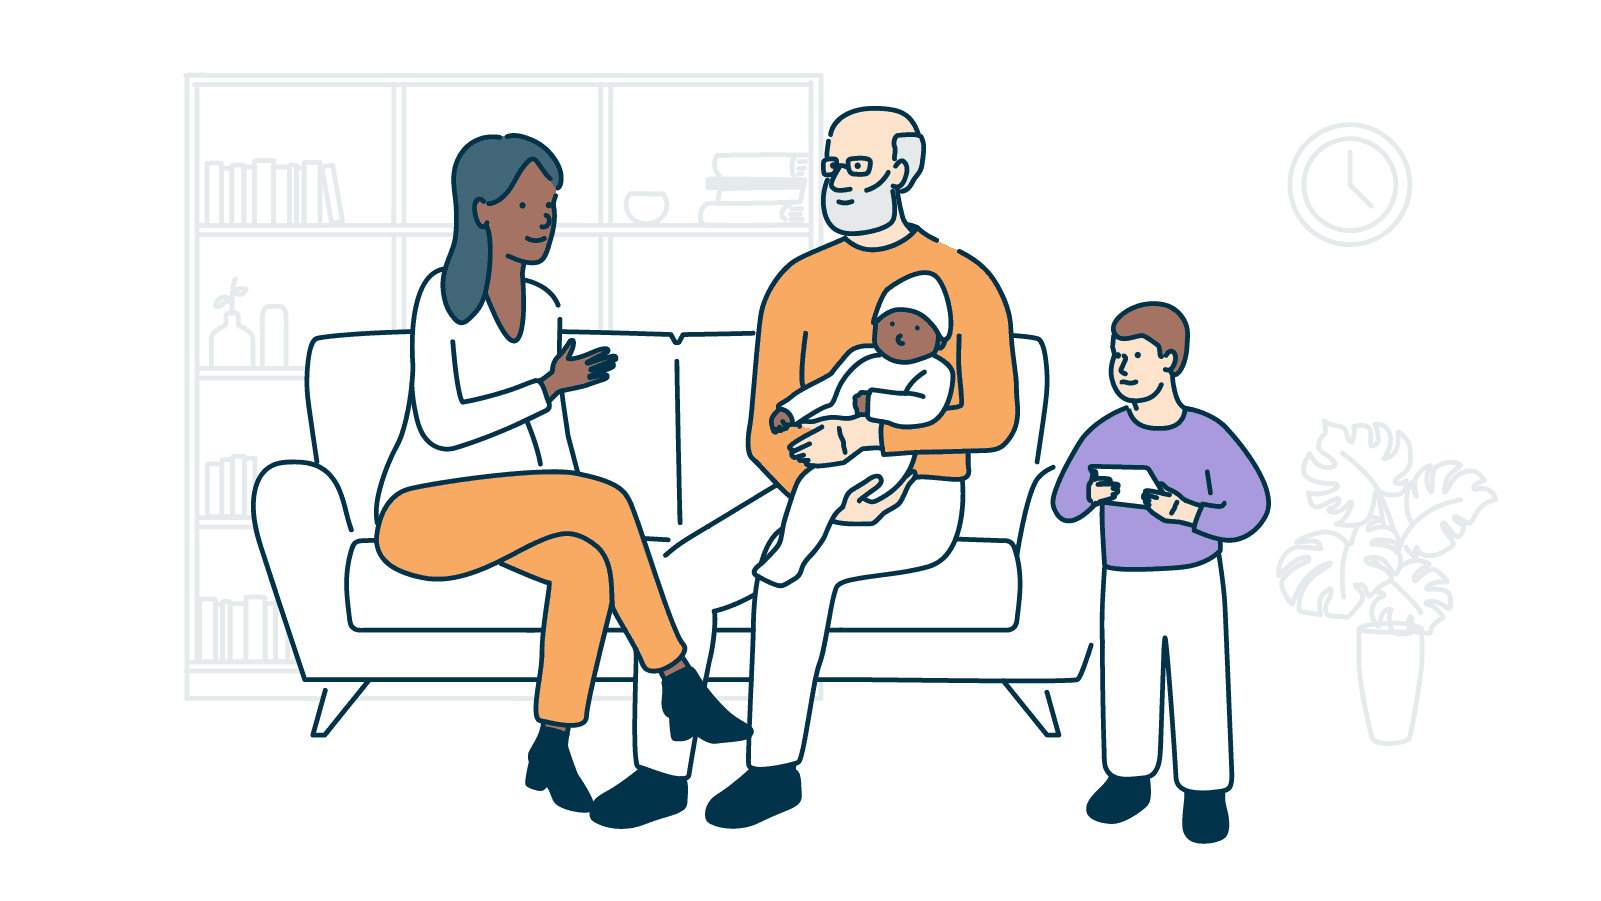 An illustration depicting a family with people of different ages